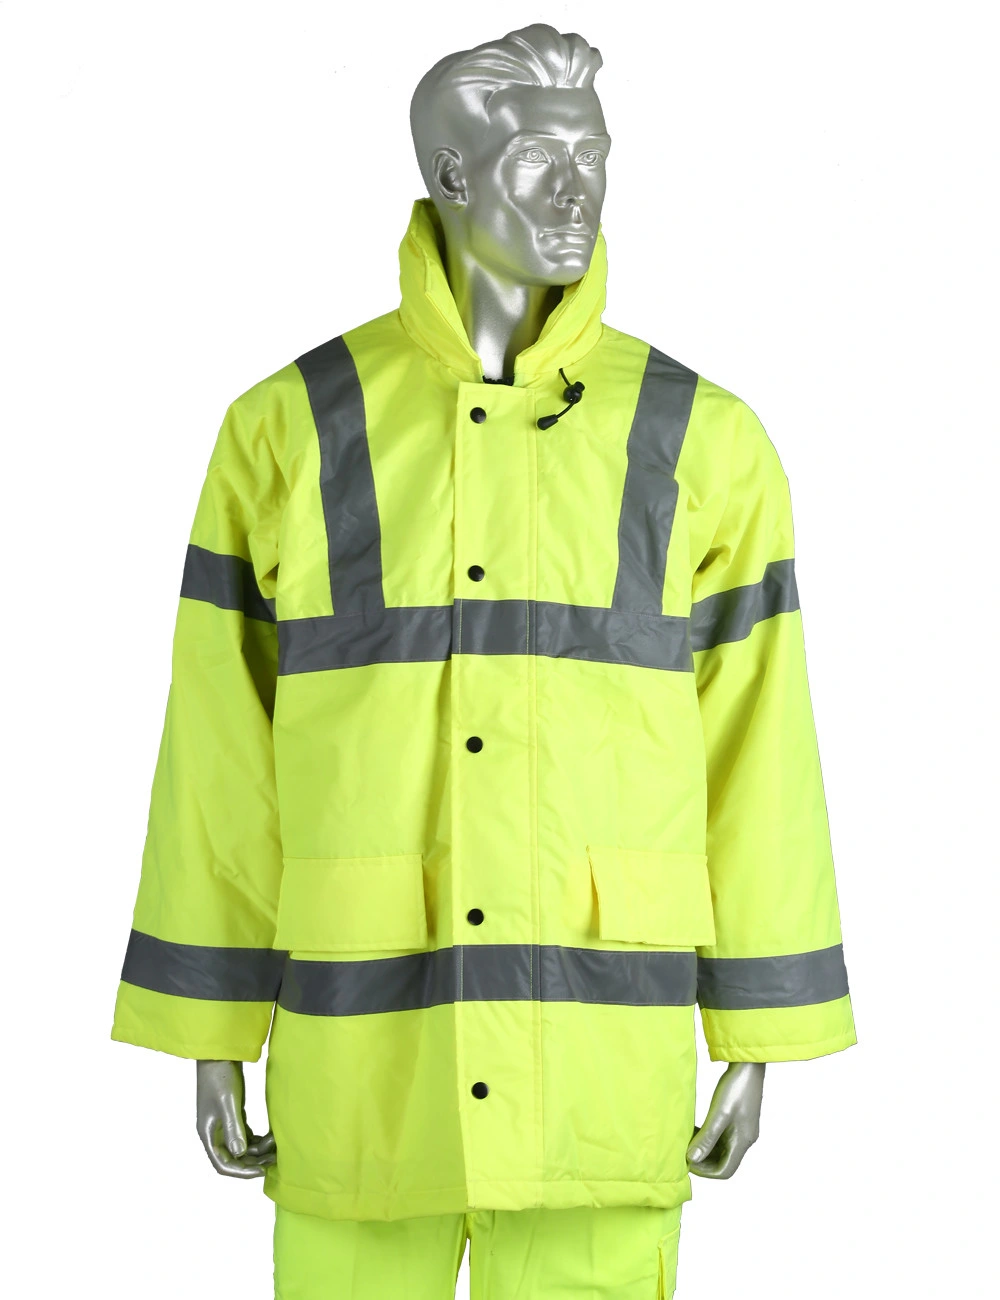 High Visibility Safety Winter Construction Safety Jackets with 3m Tape